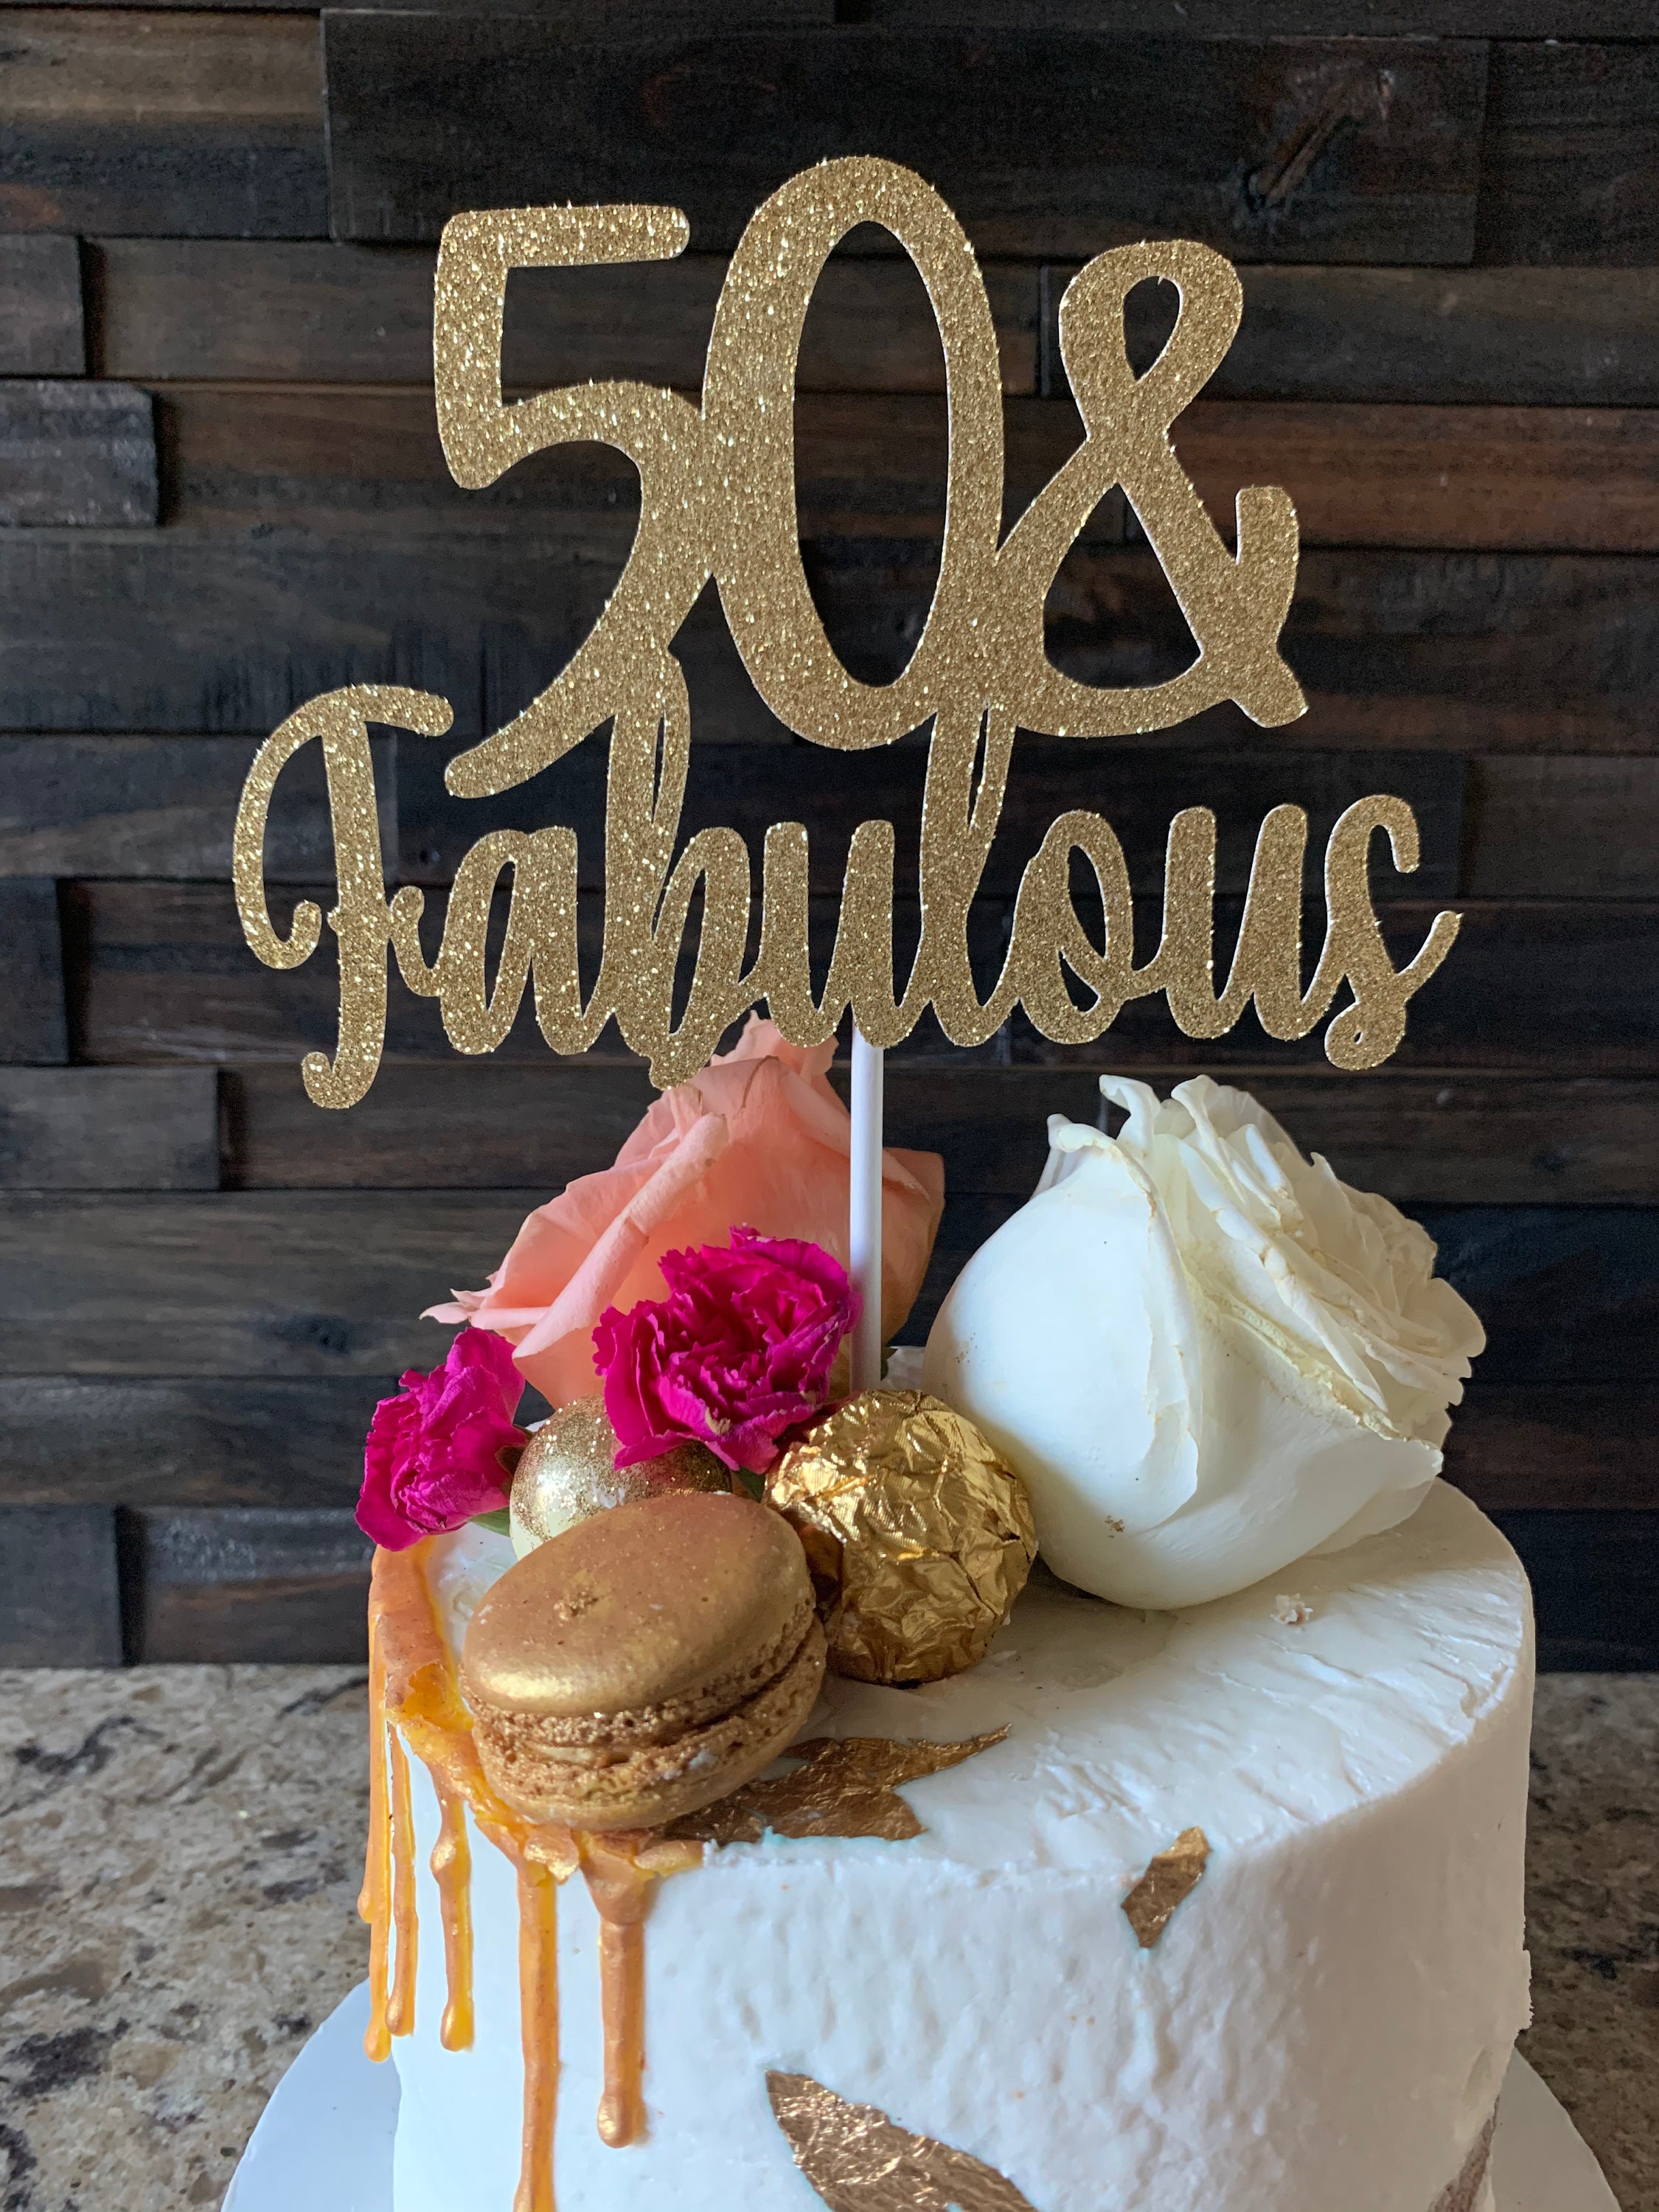 50 & Fabulous Cake Topper 50th Birthday Party Decorations - Etsy